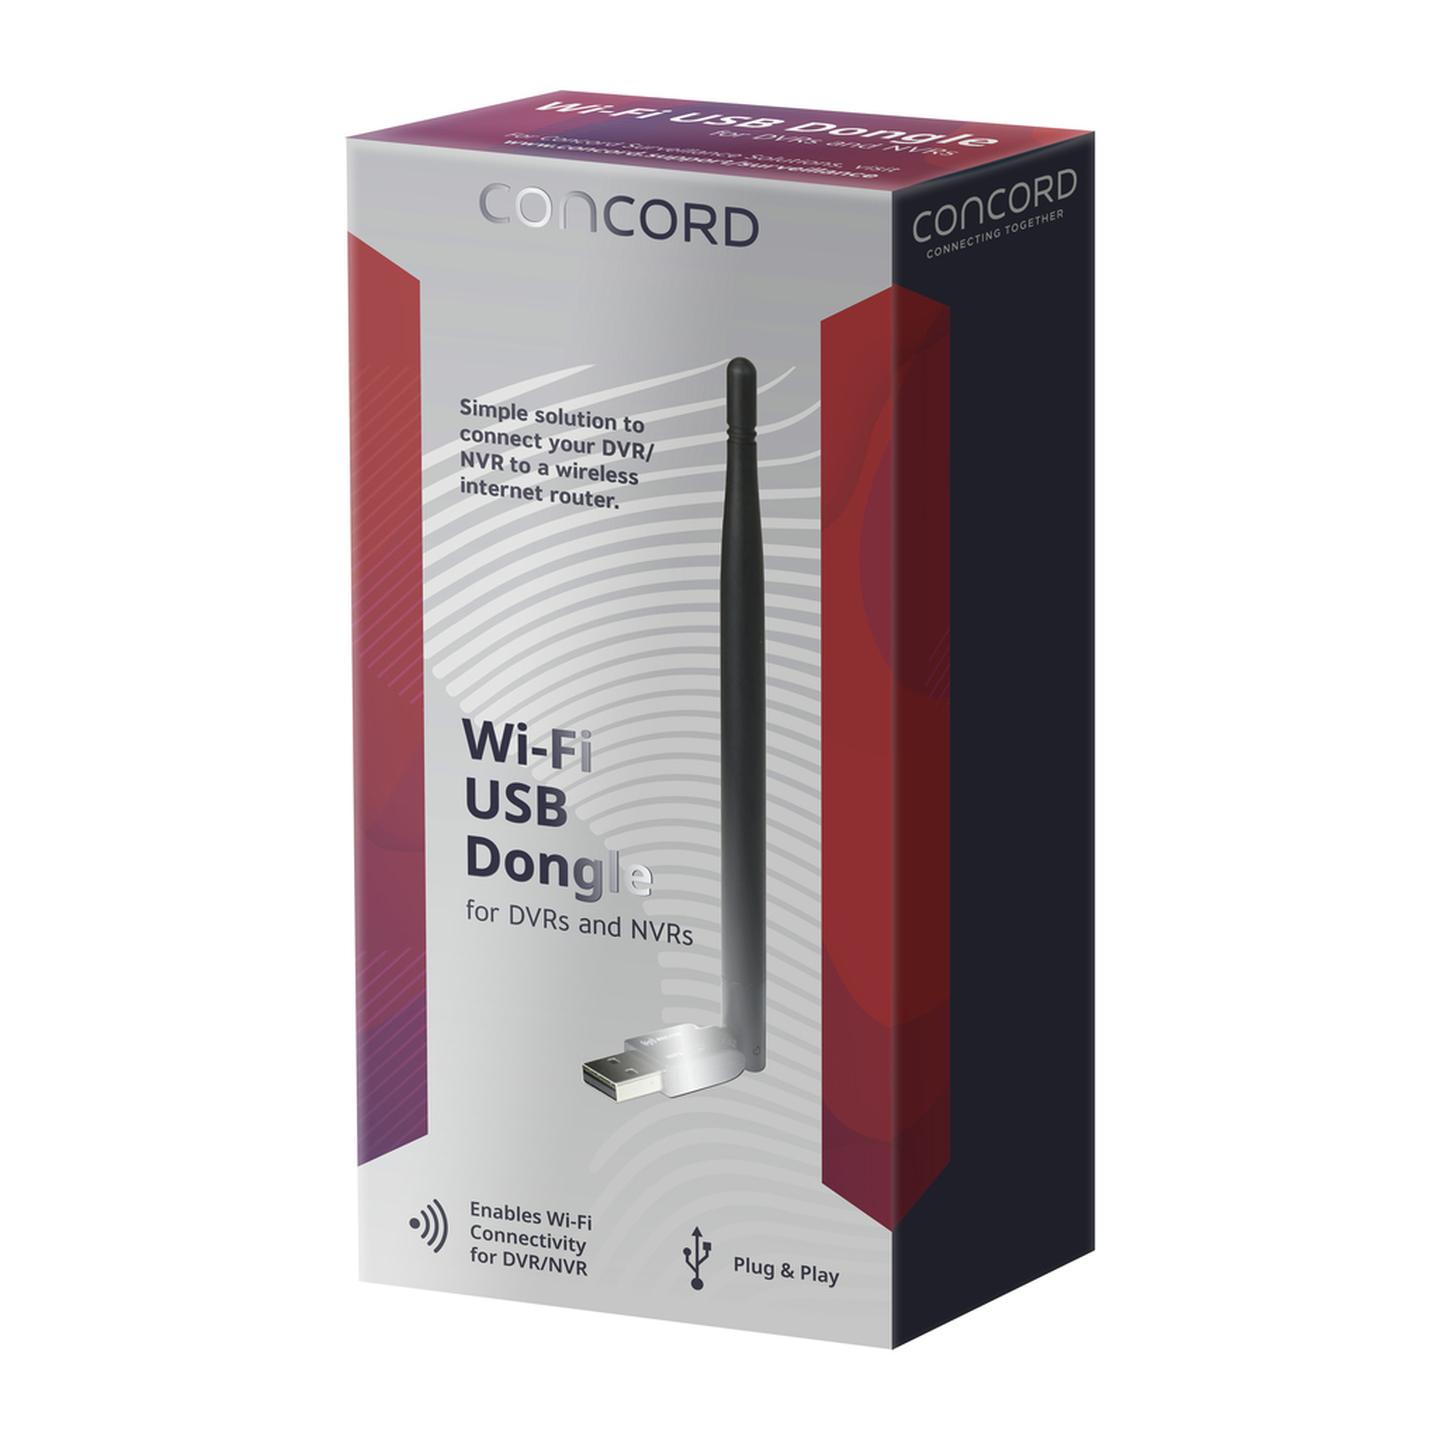 Concord Wi-Fi USB Dongle for DVRs and NVRs